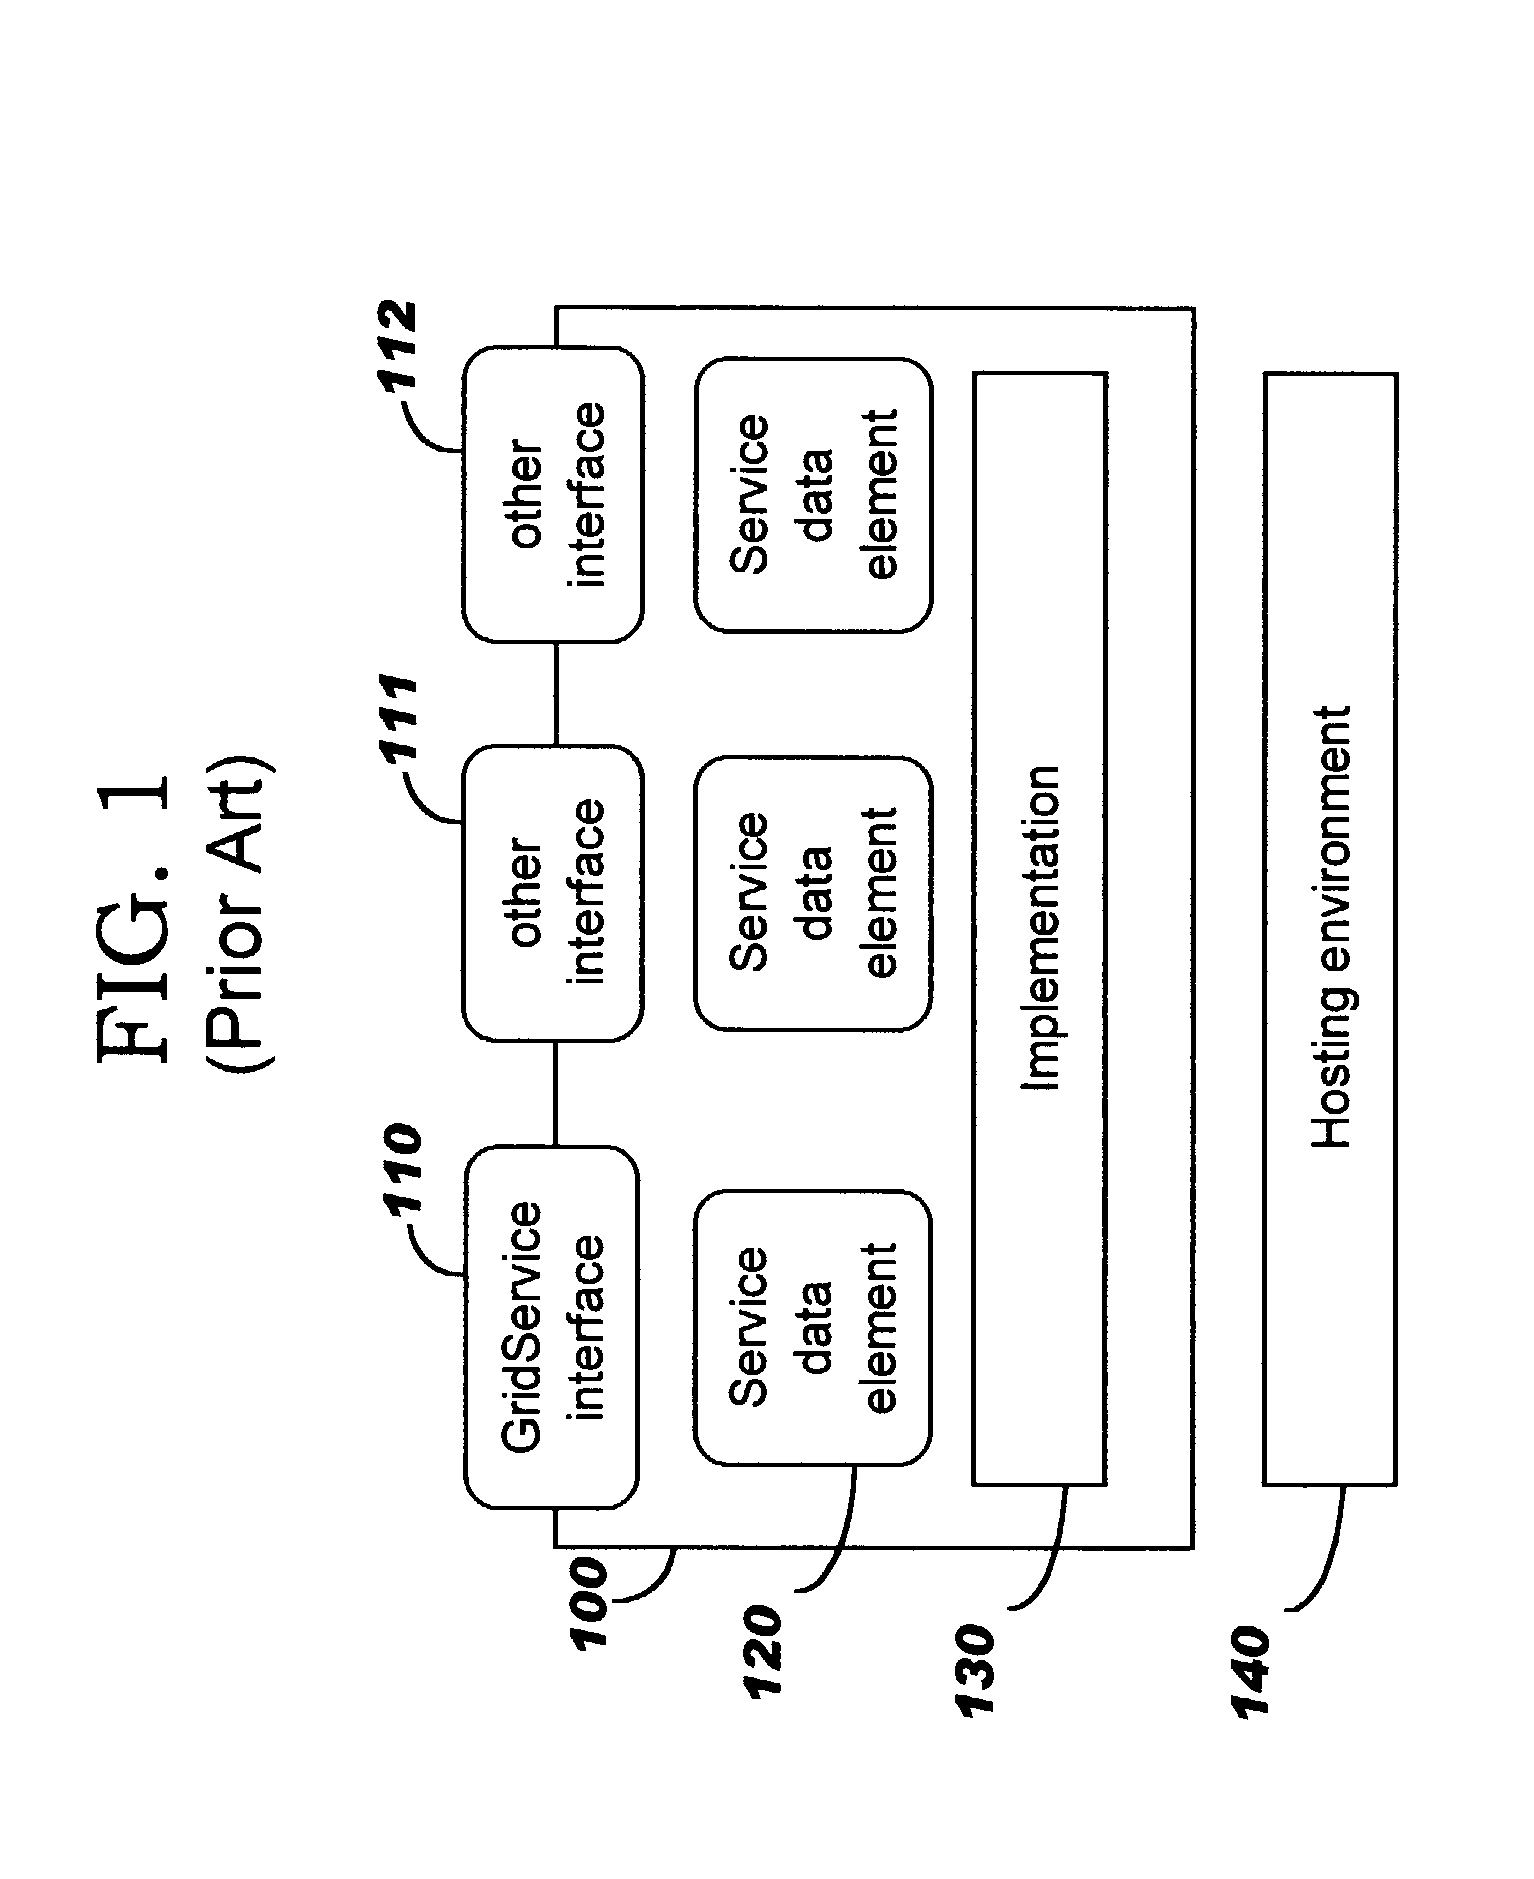 Autonomic provisioning of netowrk-accessible service behaviors within a federted grid infrastructure